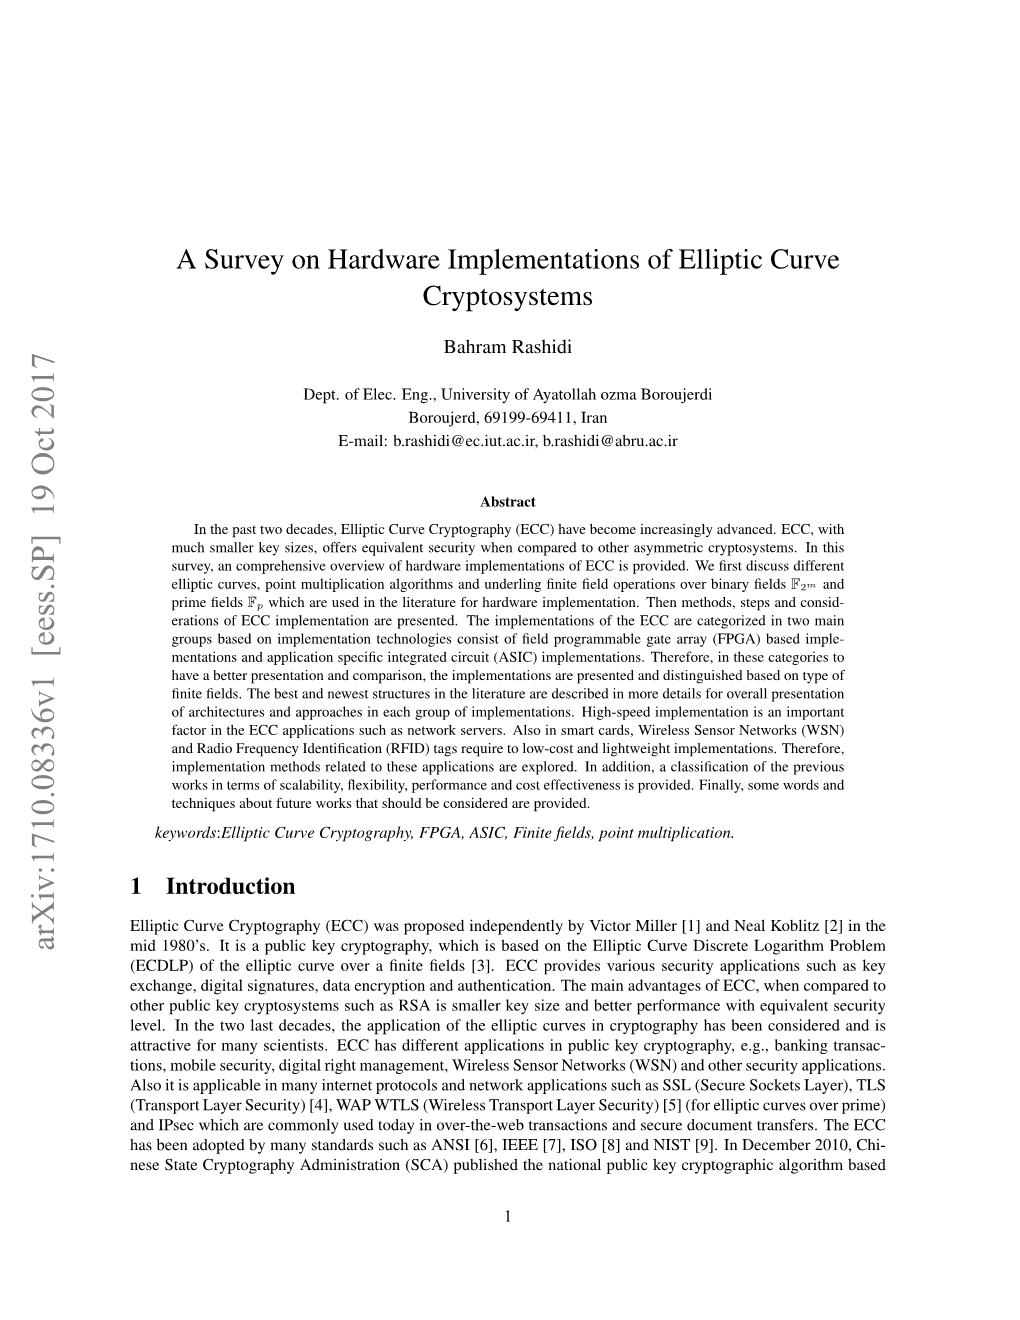 A Survey on Hardware Implementations of Elliptic Curve Cryptosystems